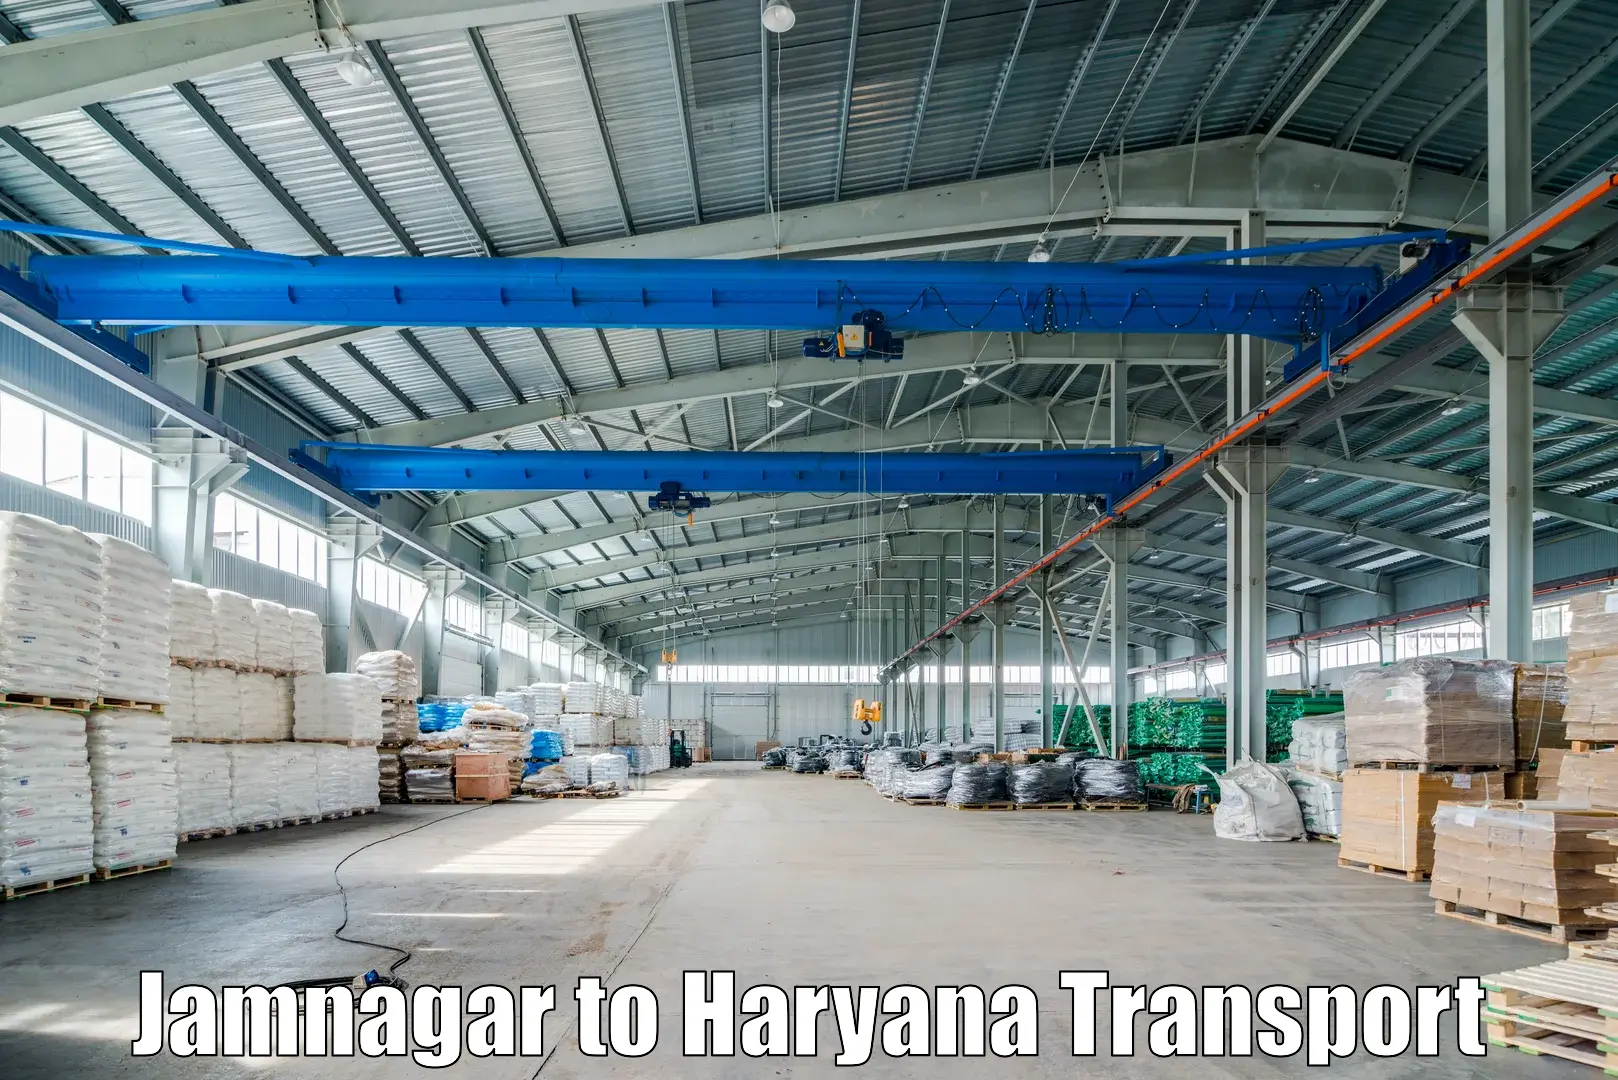 Transport bike from one state to another Jamnagar to Haryana